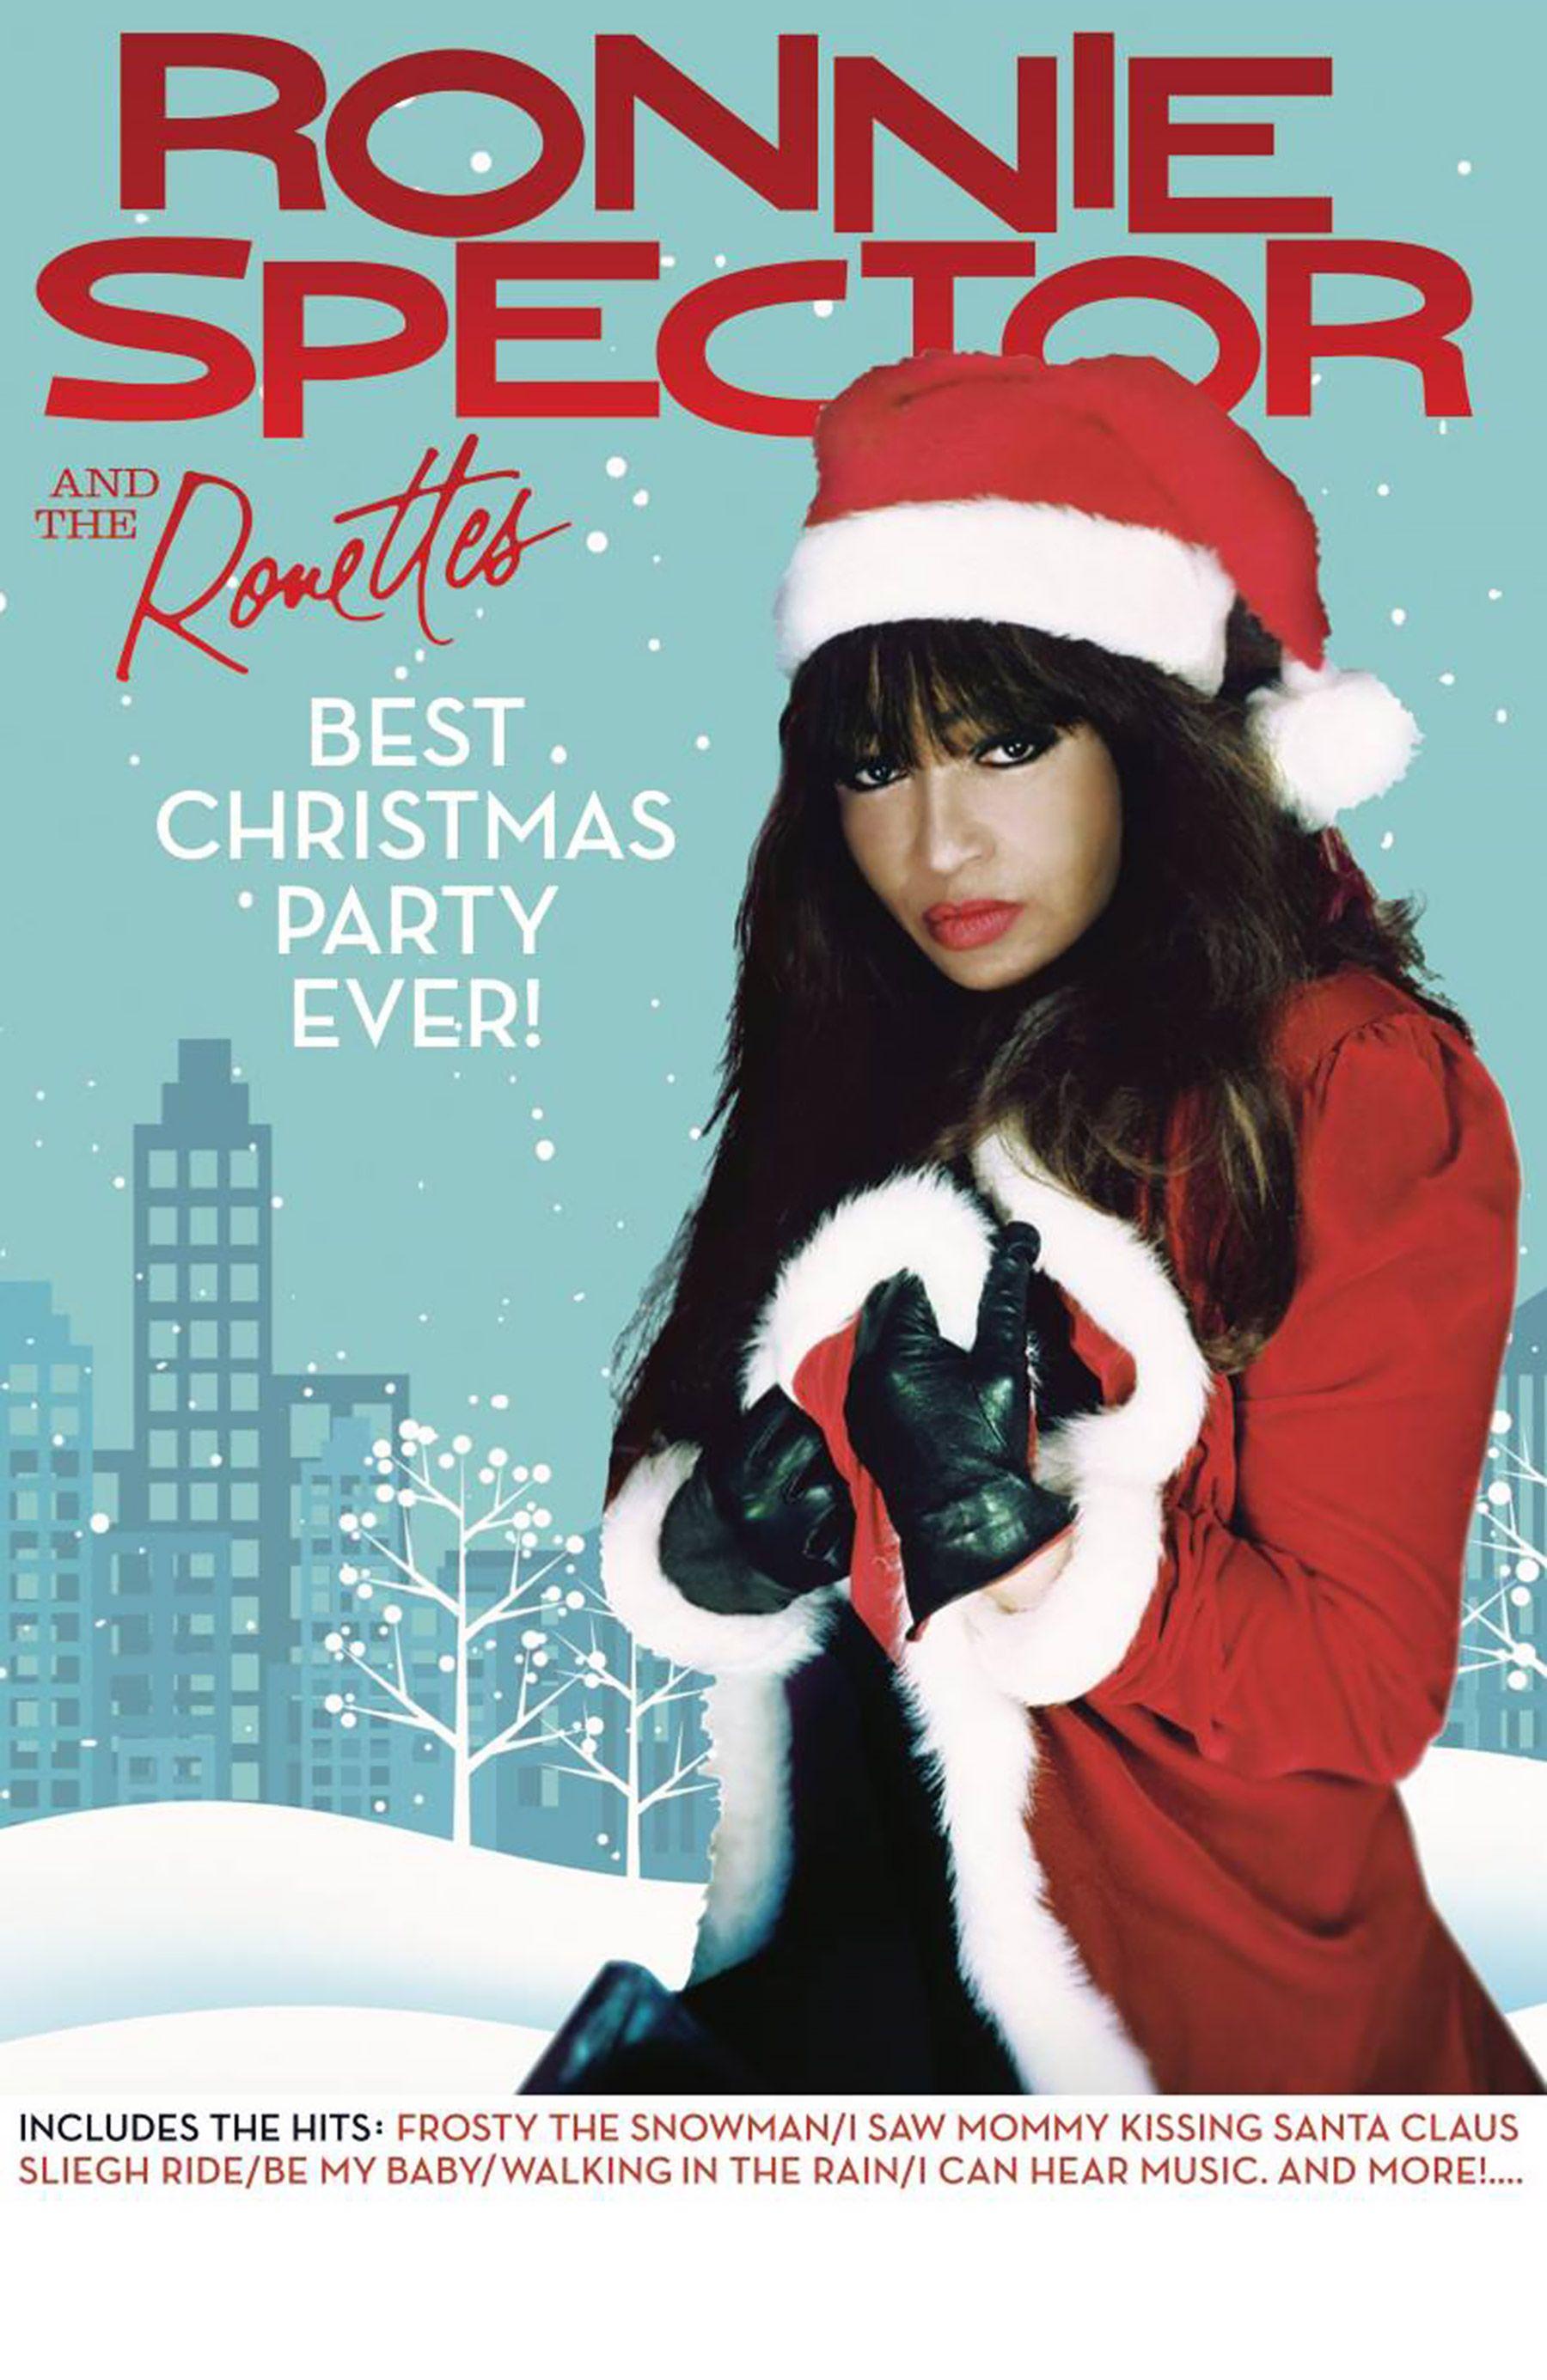 Ronnie Spector and the Ronettes Spread Some Holiday Cheer